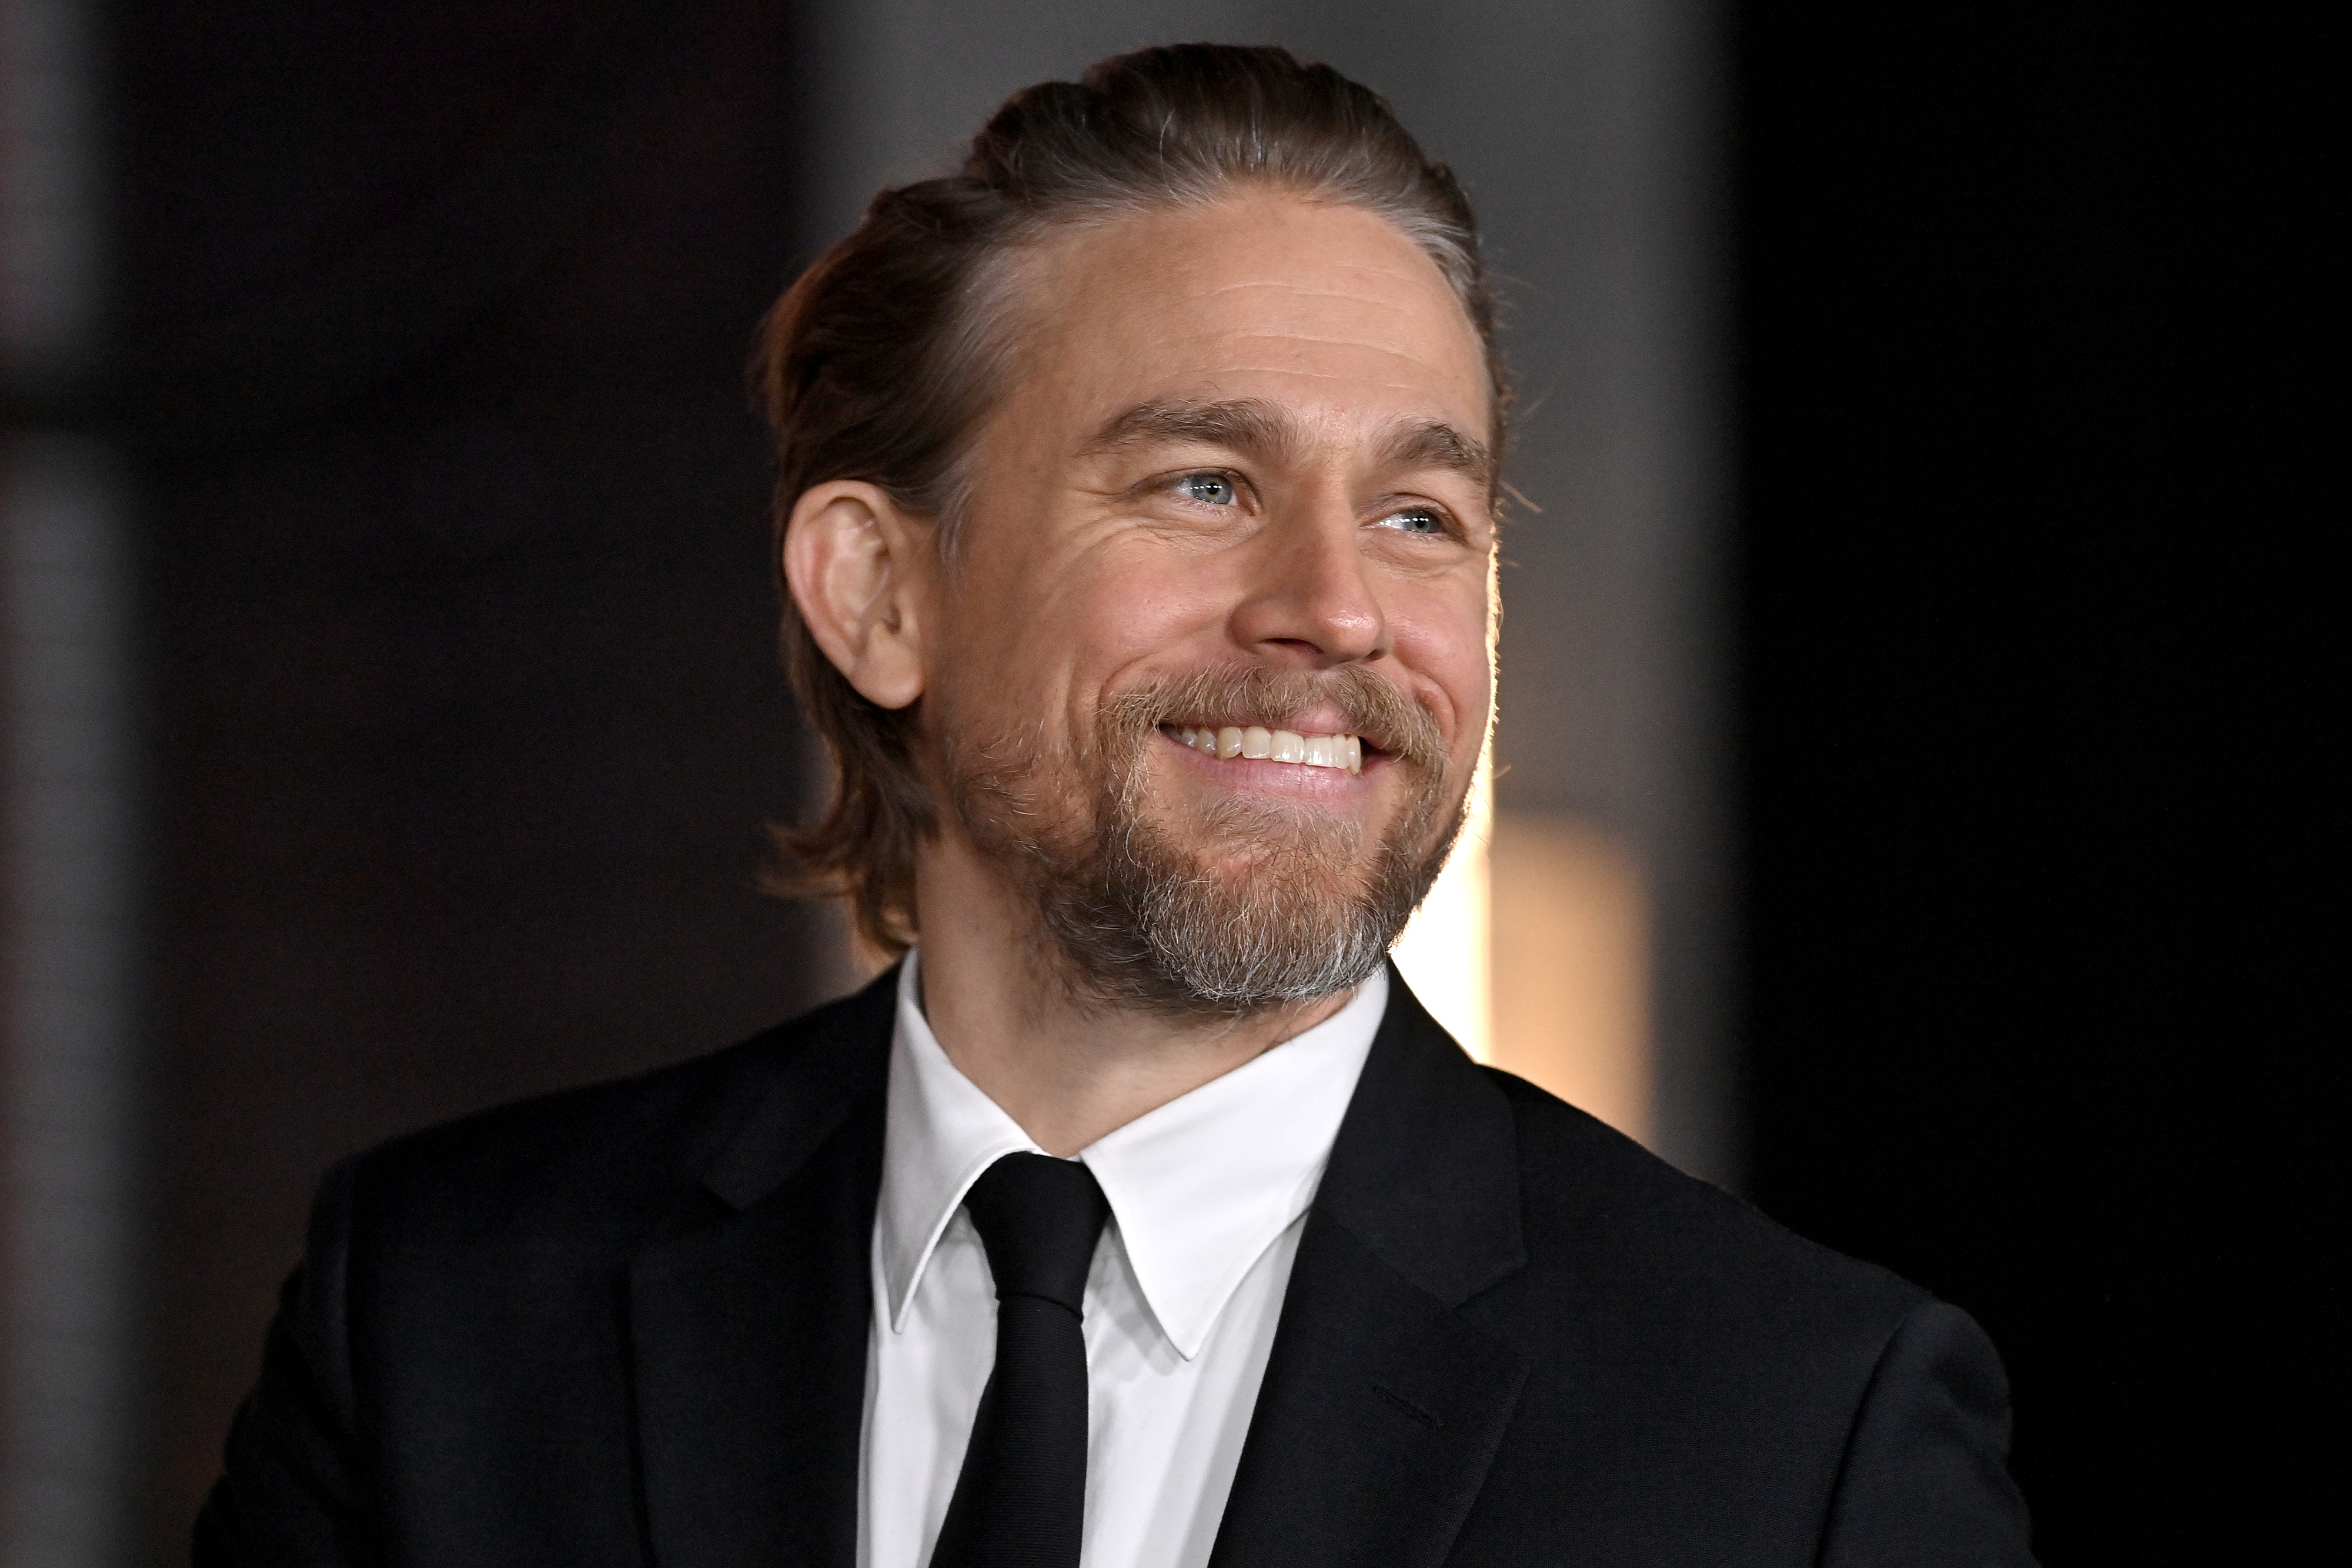 Charlie Hunnam smiling while wearing a dark suit and tie